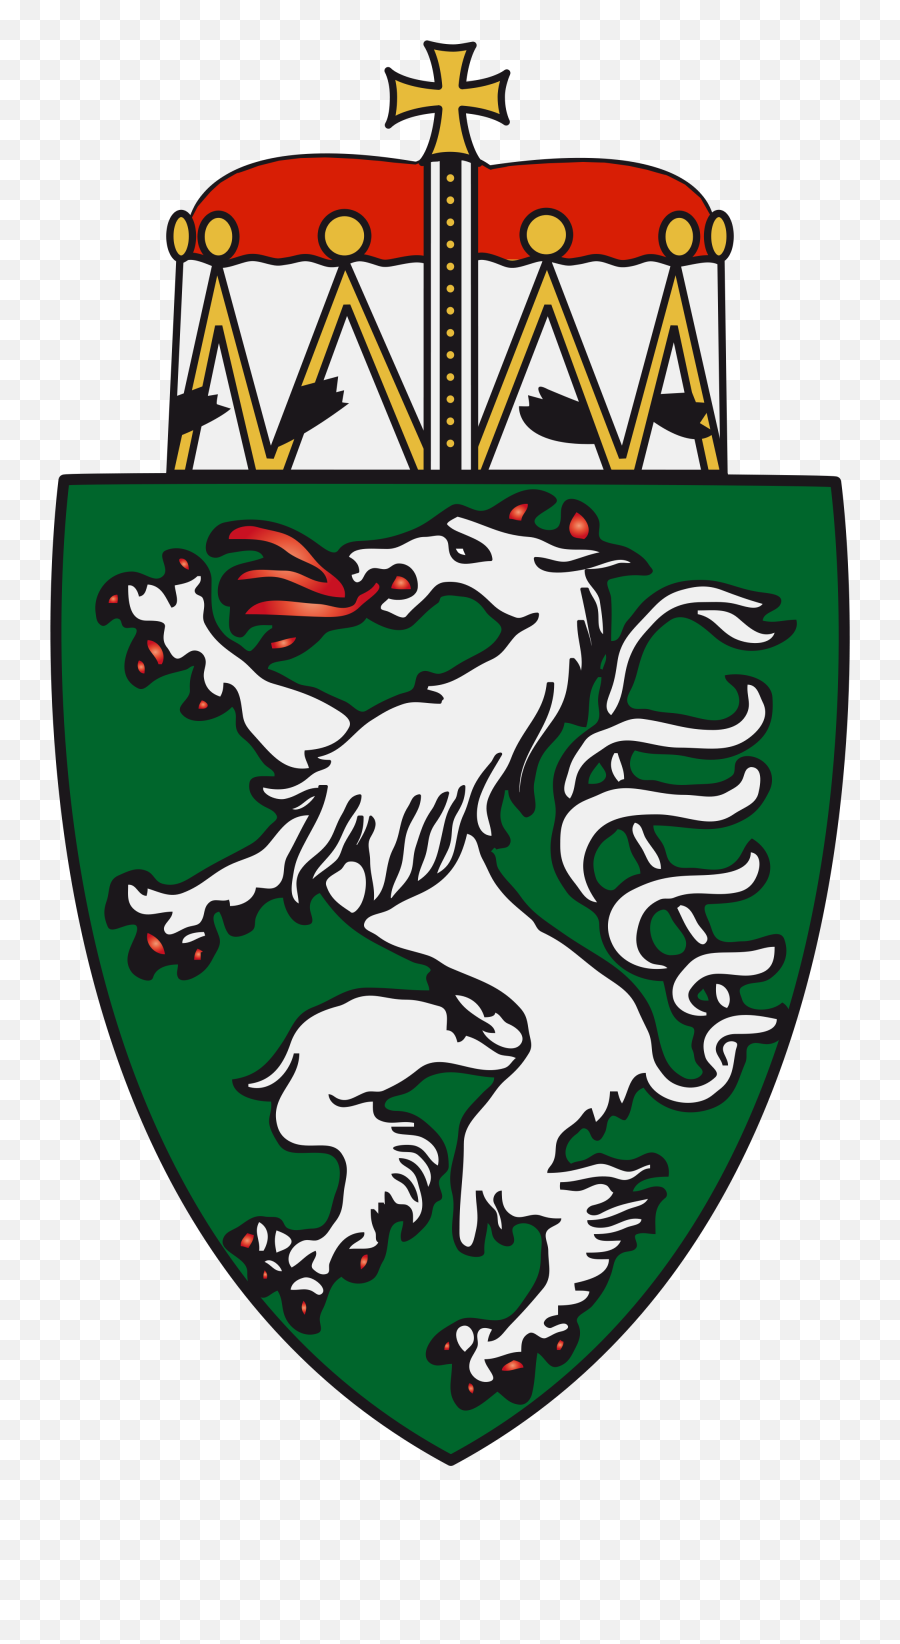 Hey Reurope Whatu0027s The Coast Of Arms Of Your City - Styria Coat Of Arms Emoji,Busy Beaver Emoticon